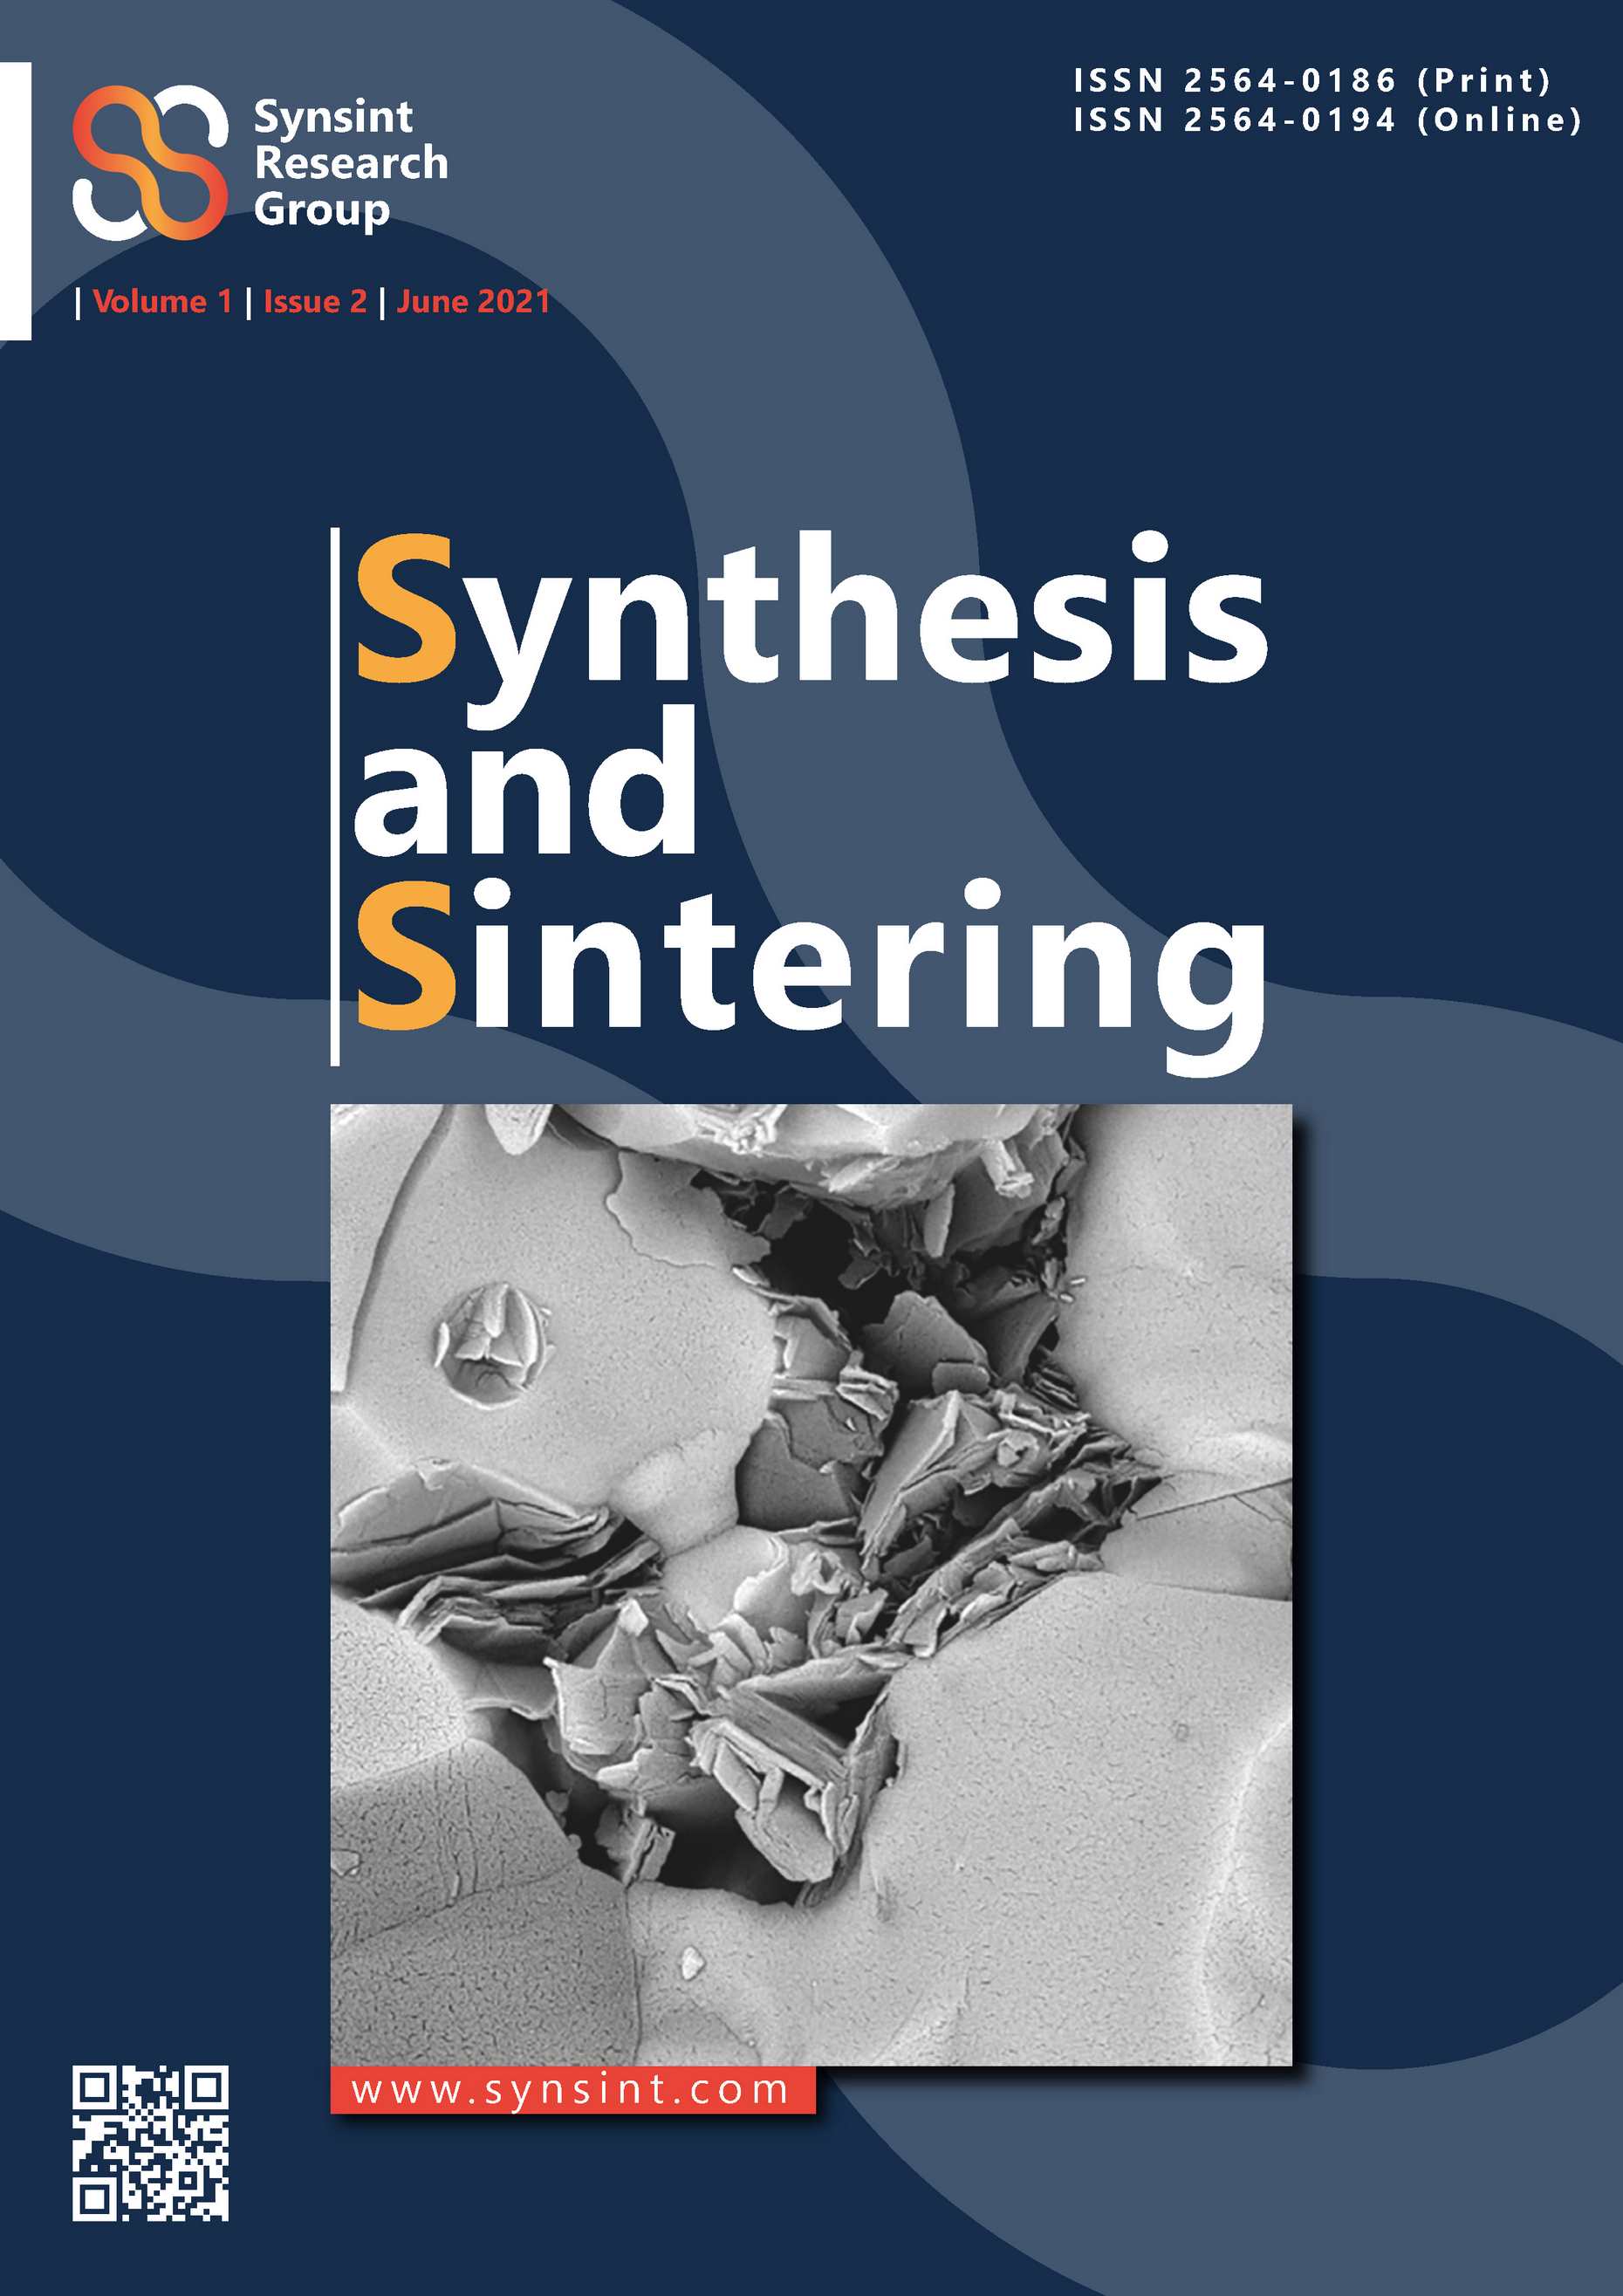 Synthesis and Sintering, Vol. 1, No. 2, 2021